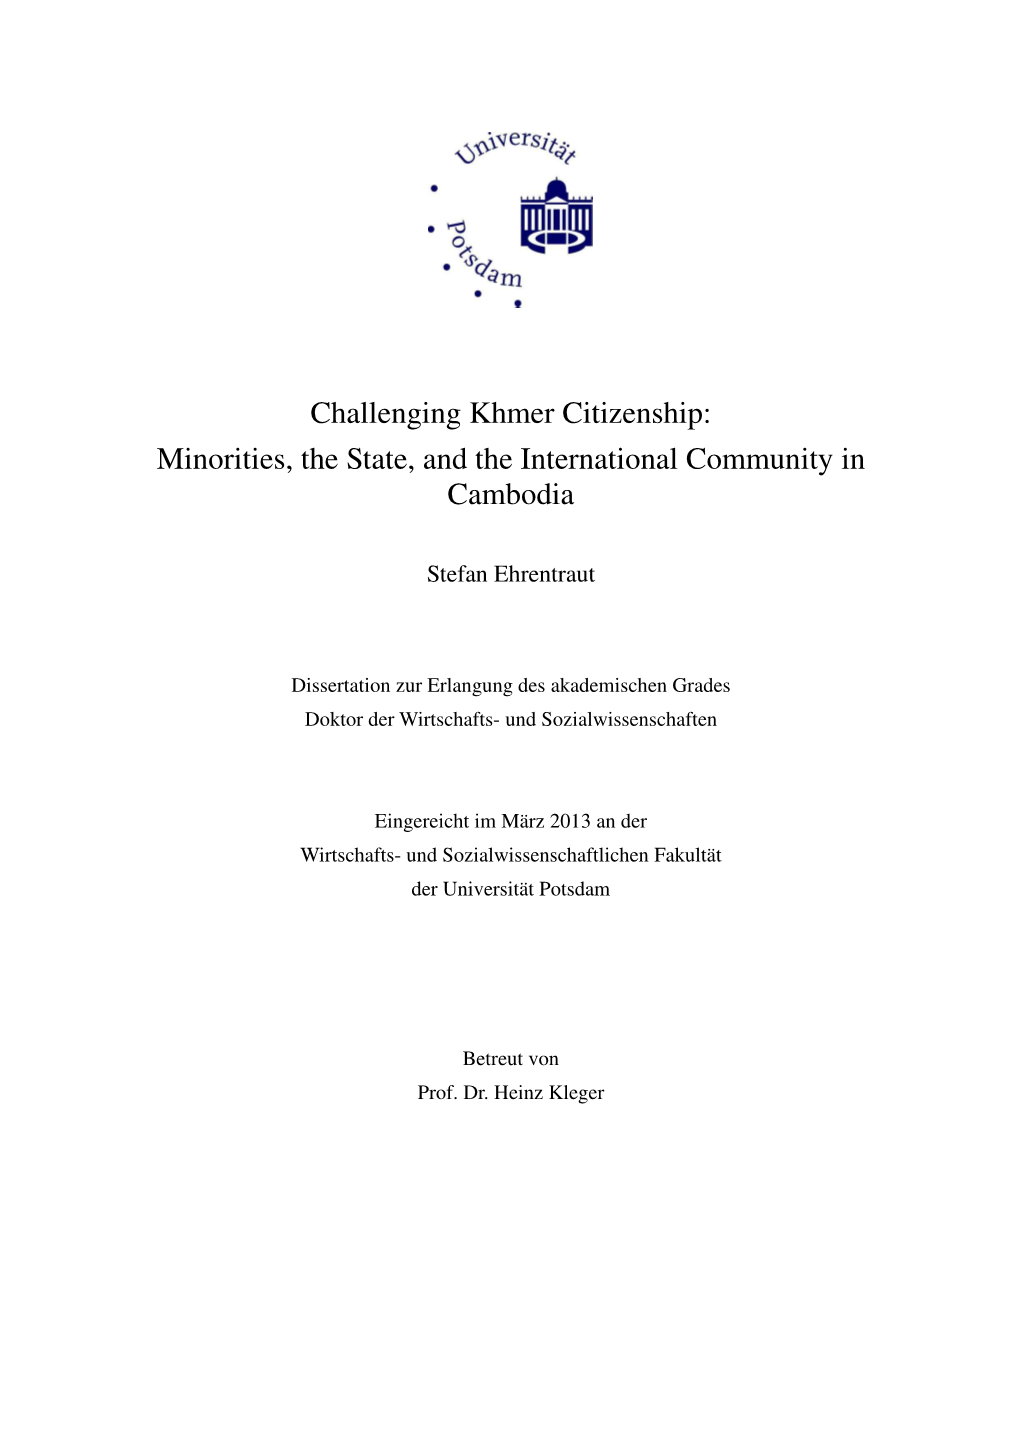 Challenging Khmer Citizenship : Minorities, the State, and The